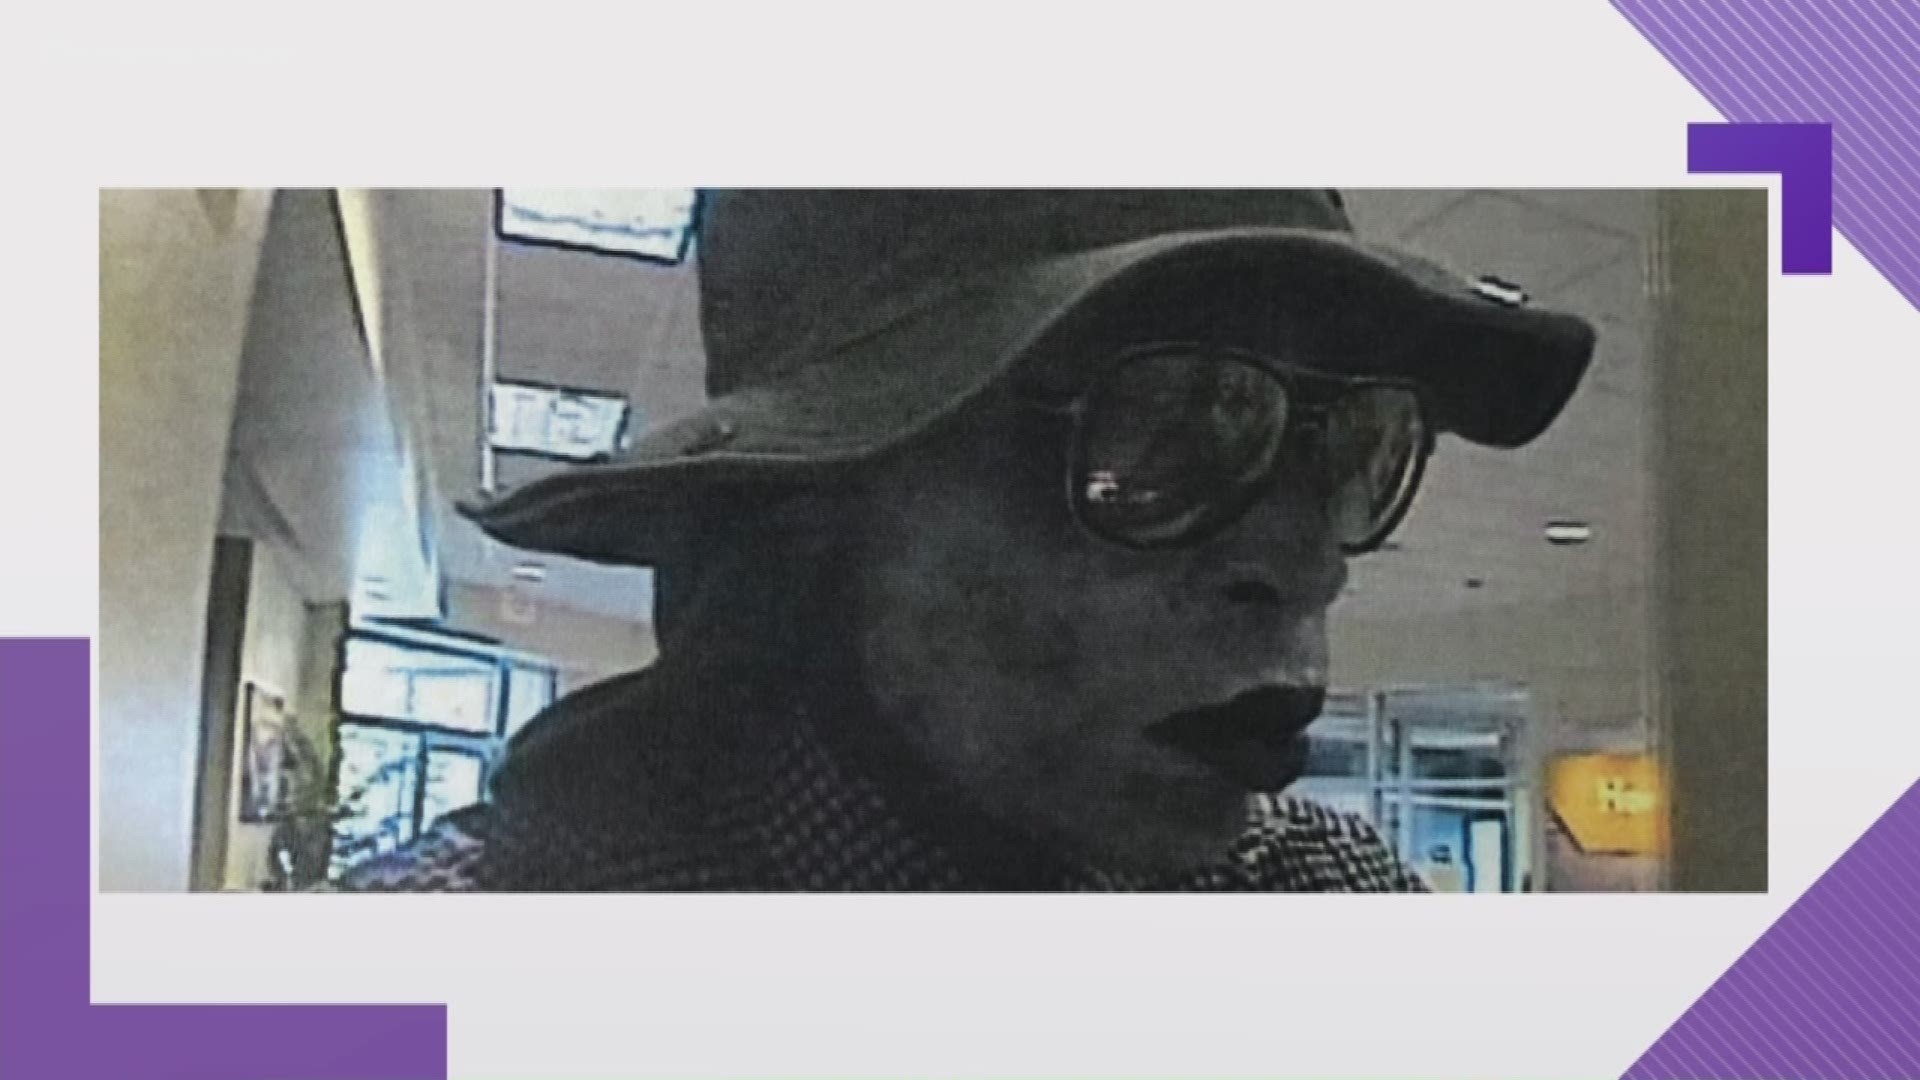 Suffolk police are looking for a man who robbed a credit union with a white substance on his face. The crime took place at the ABNB Federal Credit Union on Harbour View Boulevard.